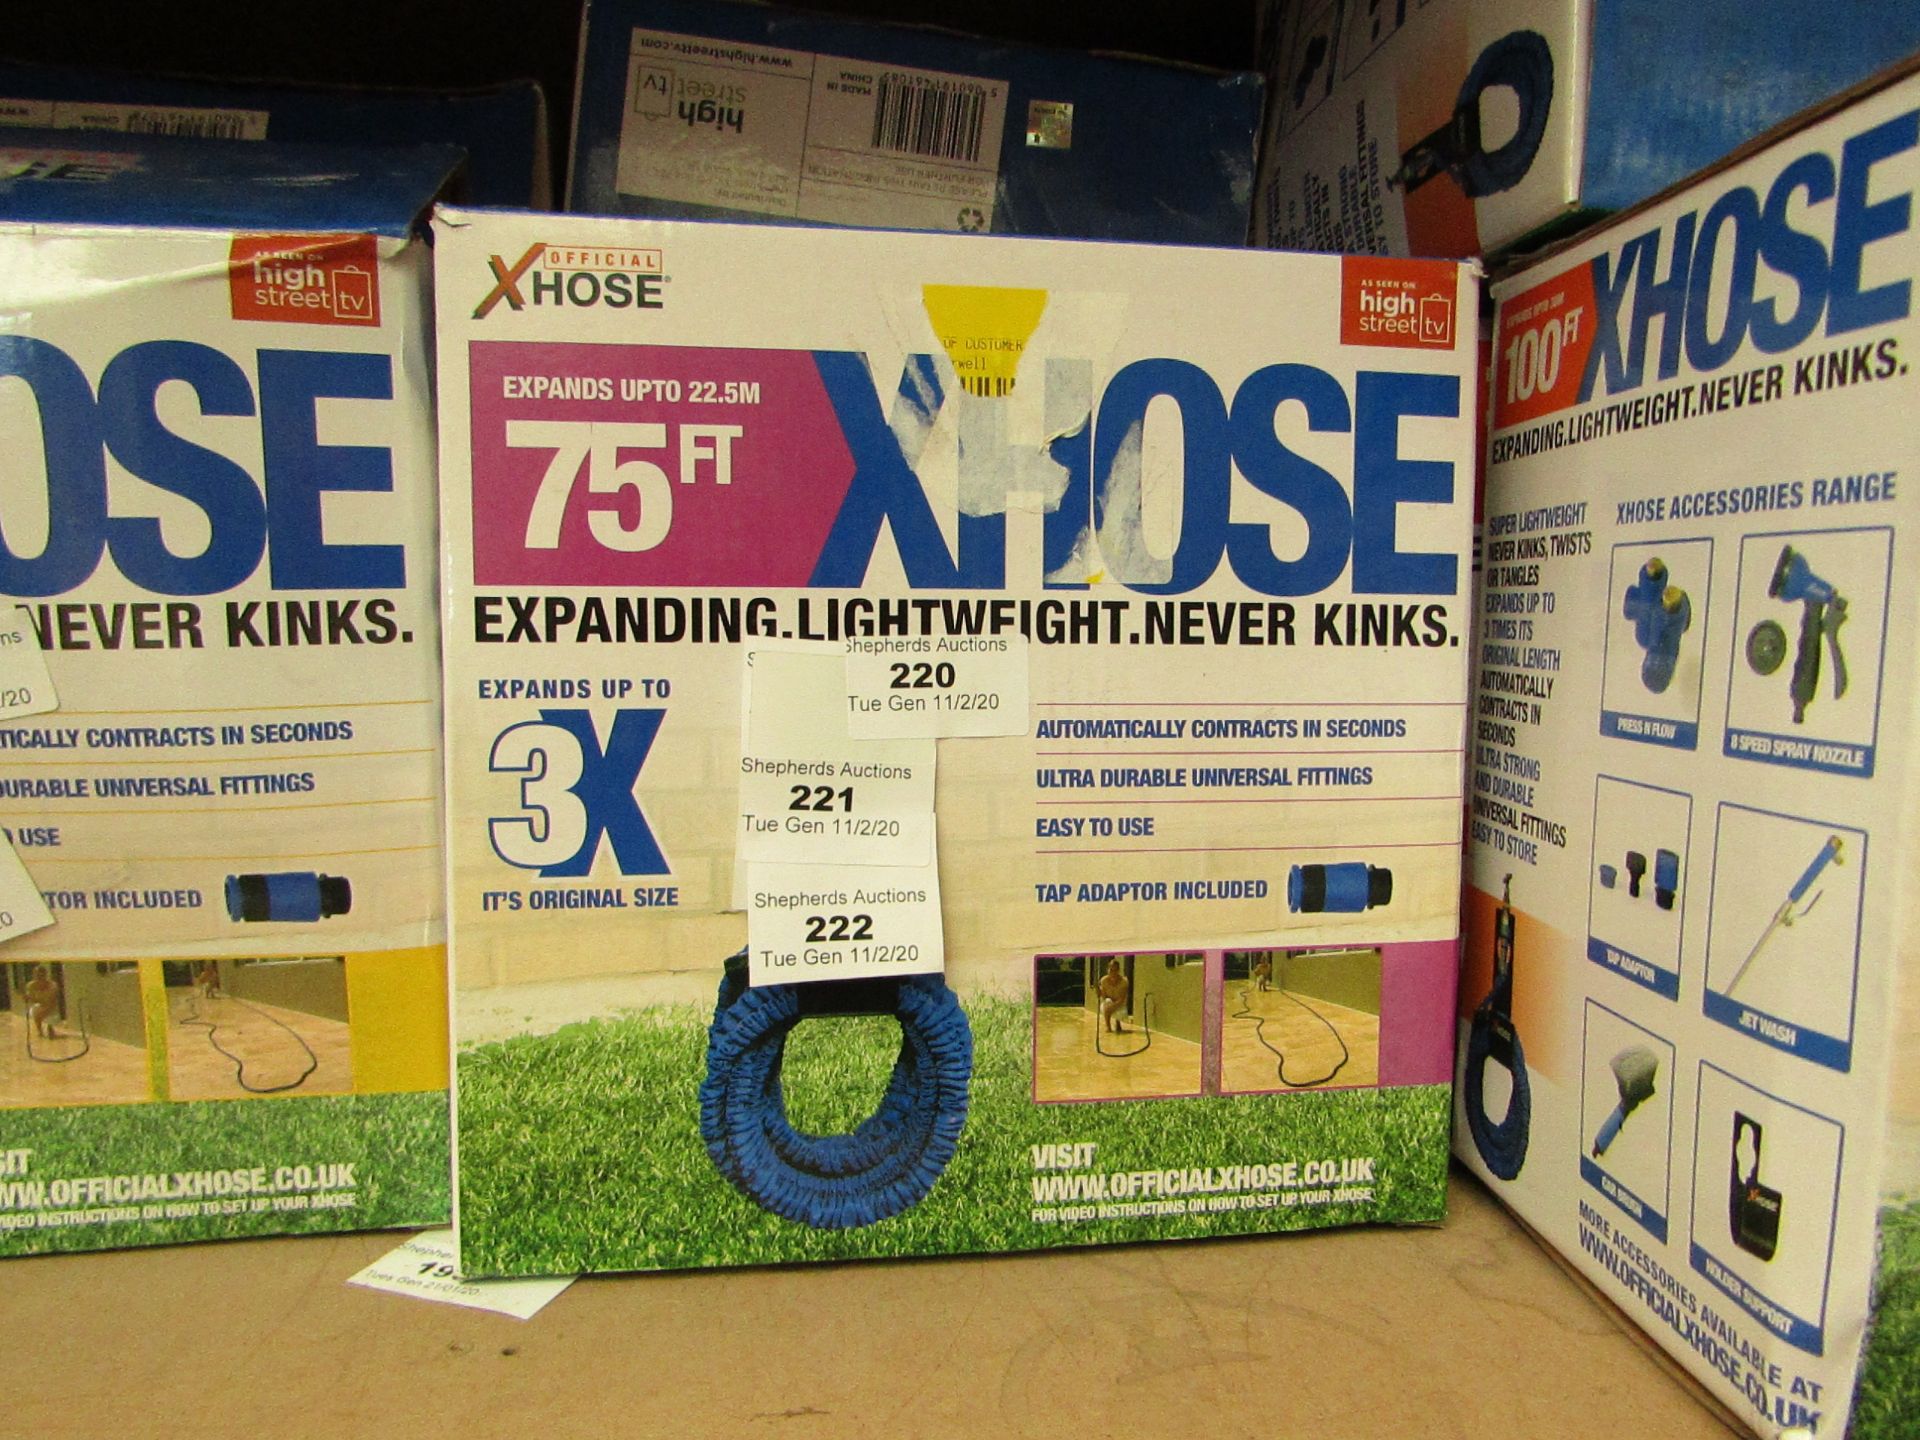 | 1x | XHOSE 75FT | UNCHECKED & BOXED | NO ONLINE RE-SALE | SKU C5060191461085 | RRP £49.99 |